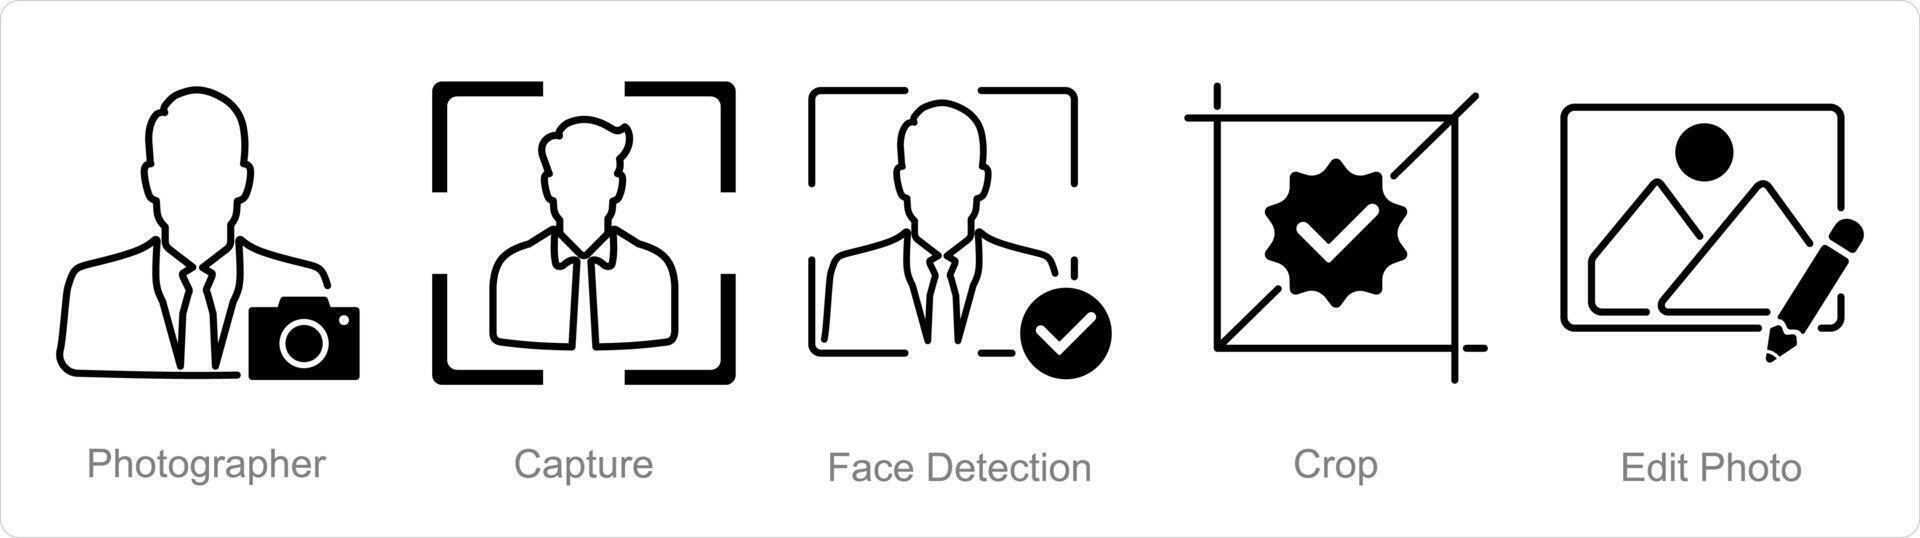 A set of 5 Photography icons as photographer, capture, face detection vector